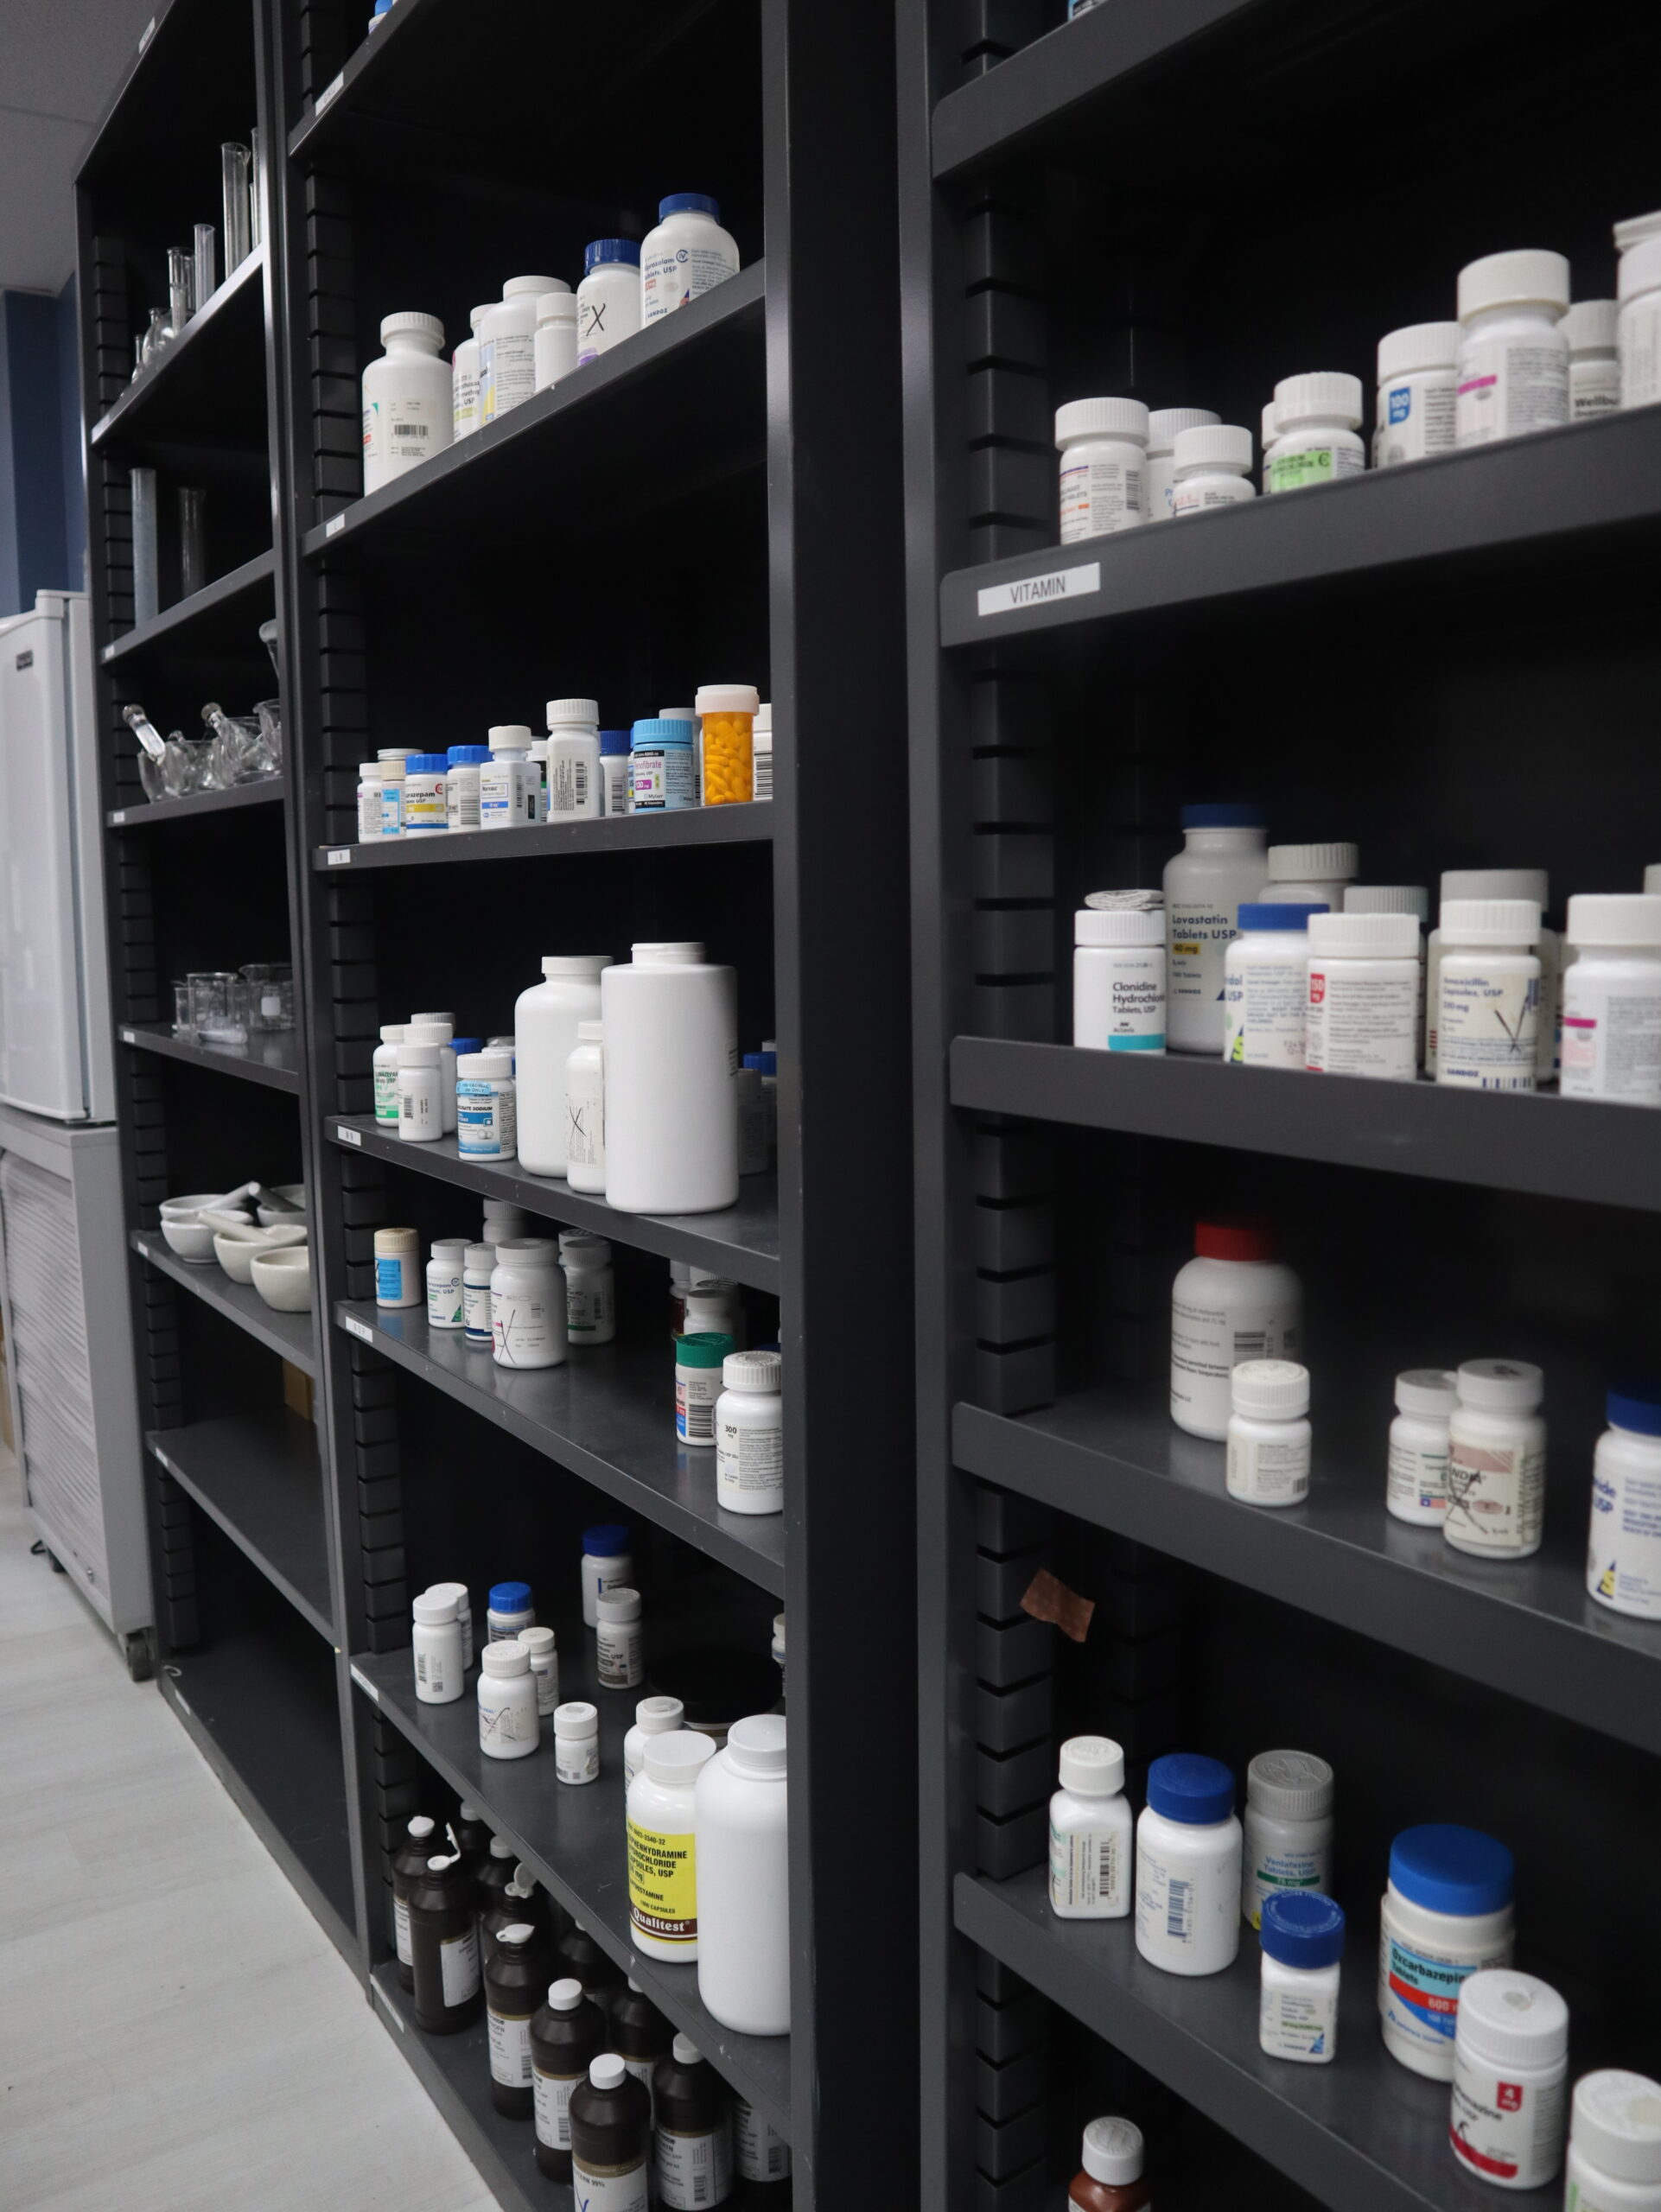 A picture of the shelves inside the FVI pharmacy lab showing bottles of pills